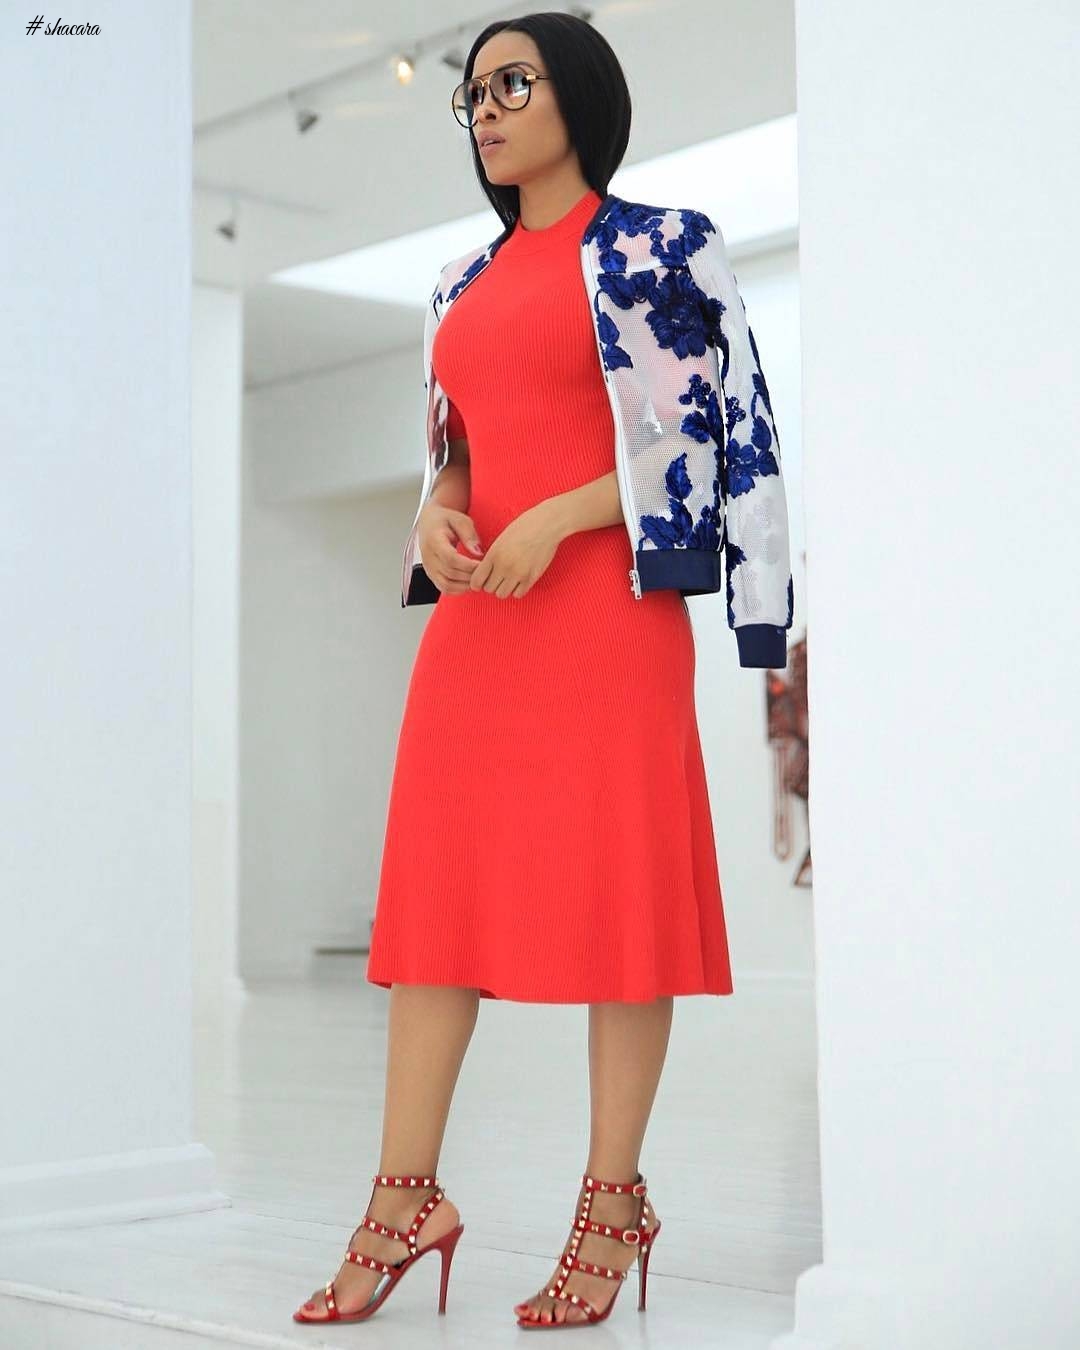 6 STYLE MOVES THAT WORK FOR OFFICE